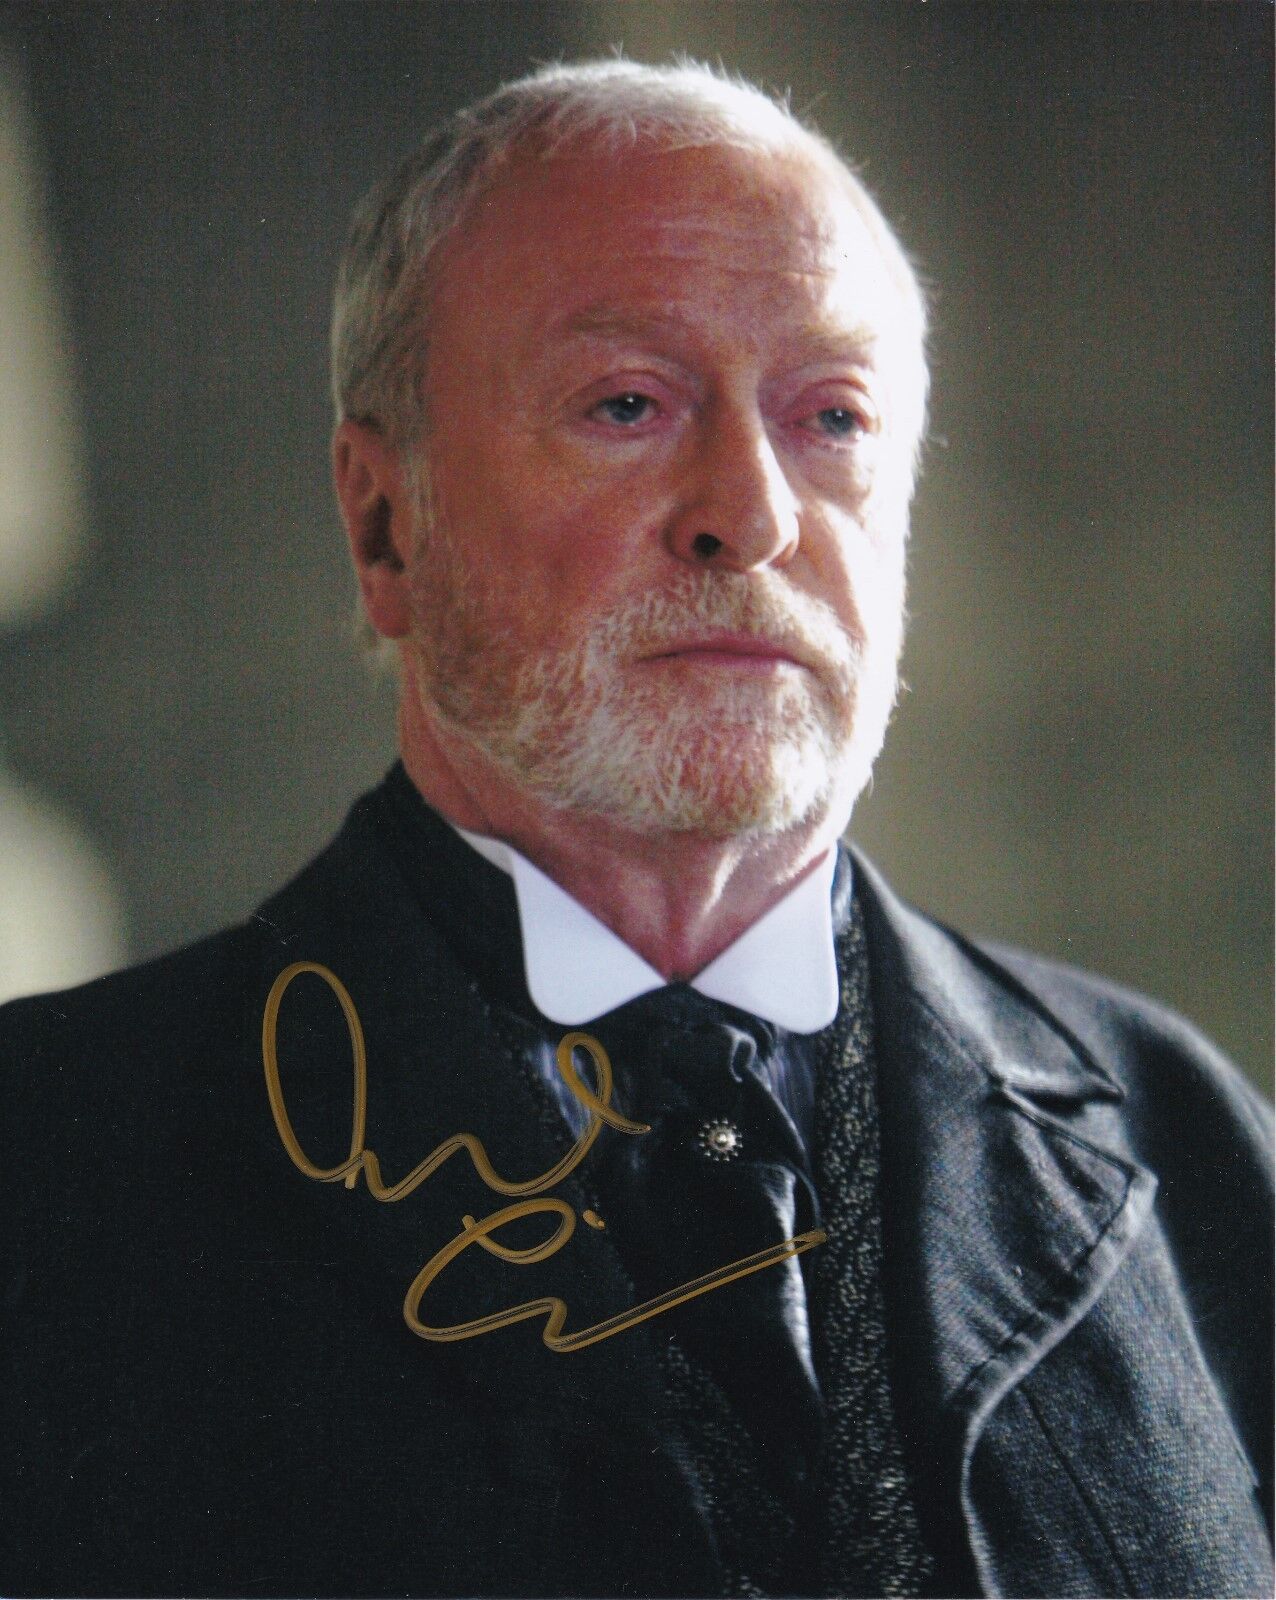 Michael Caine ‘Batman’ Autographed 8x10 Photo Poster painting with CoA & Signing Details